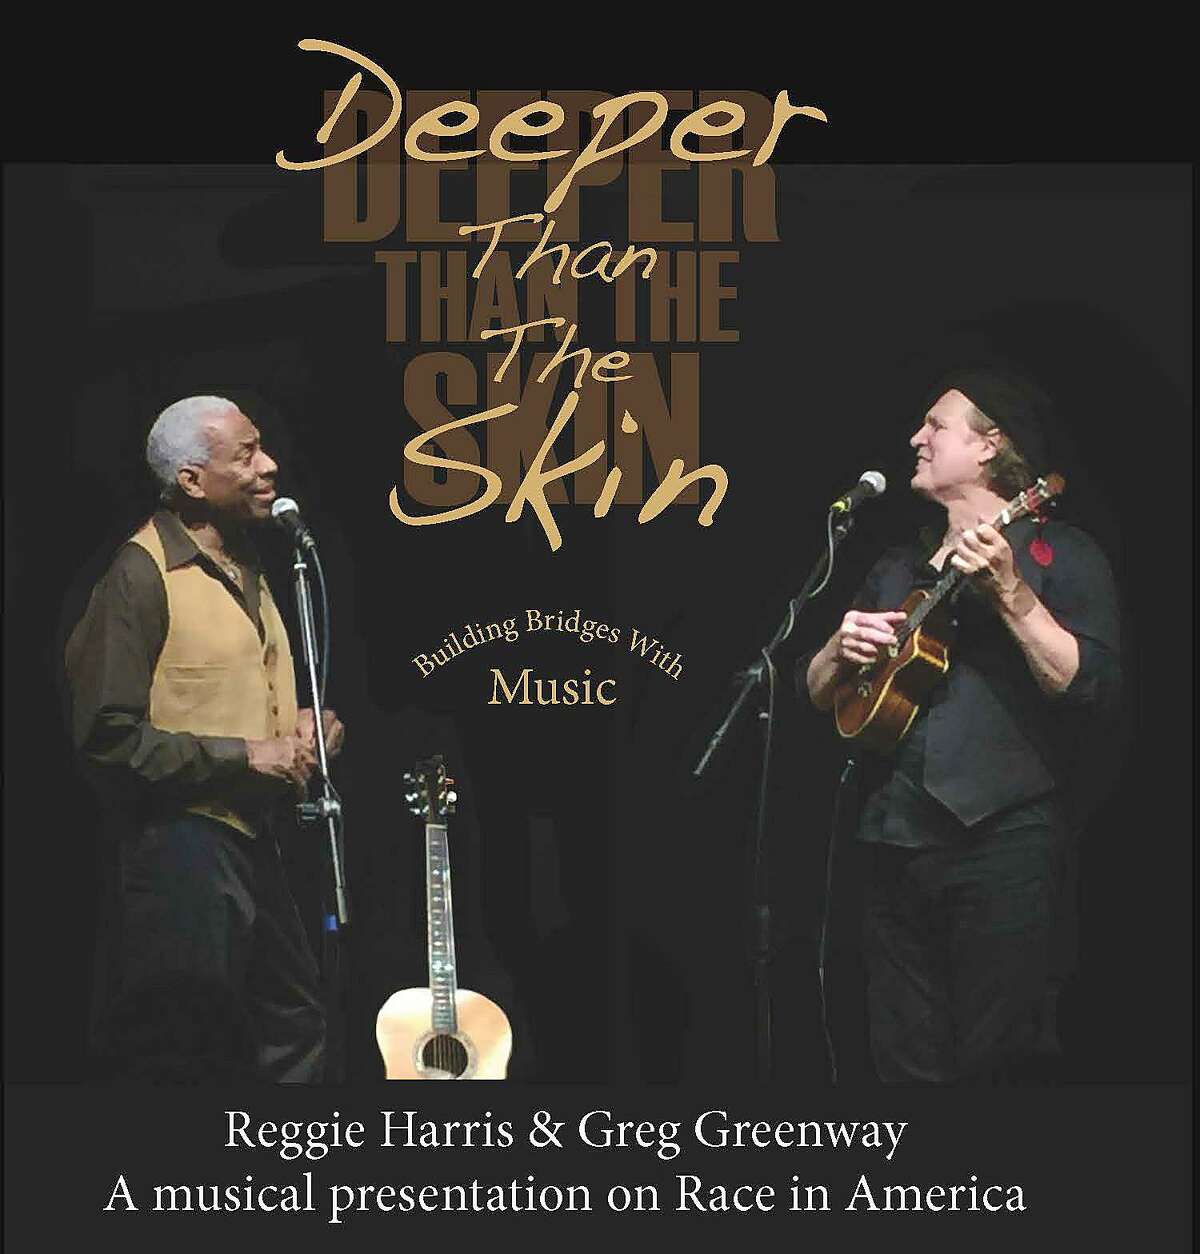 Veteran singer-songwriters Reggie Harris and Greg Greenway will perform at the Good Folk Coffeehouse this Sunday, Sept. 30, 2018.